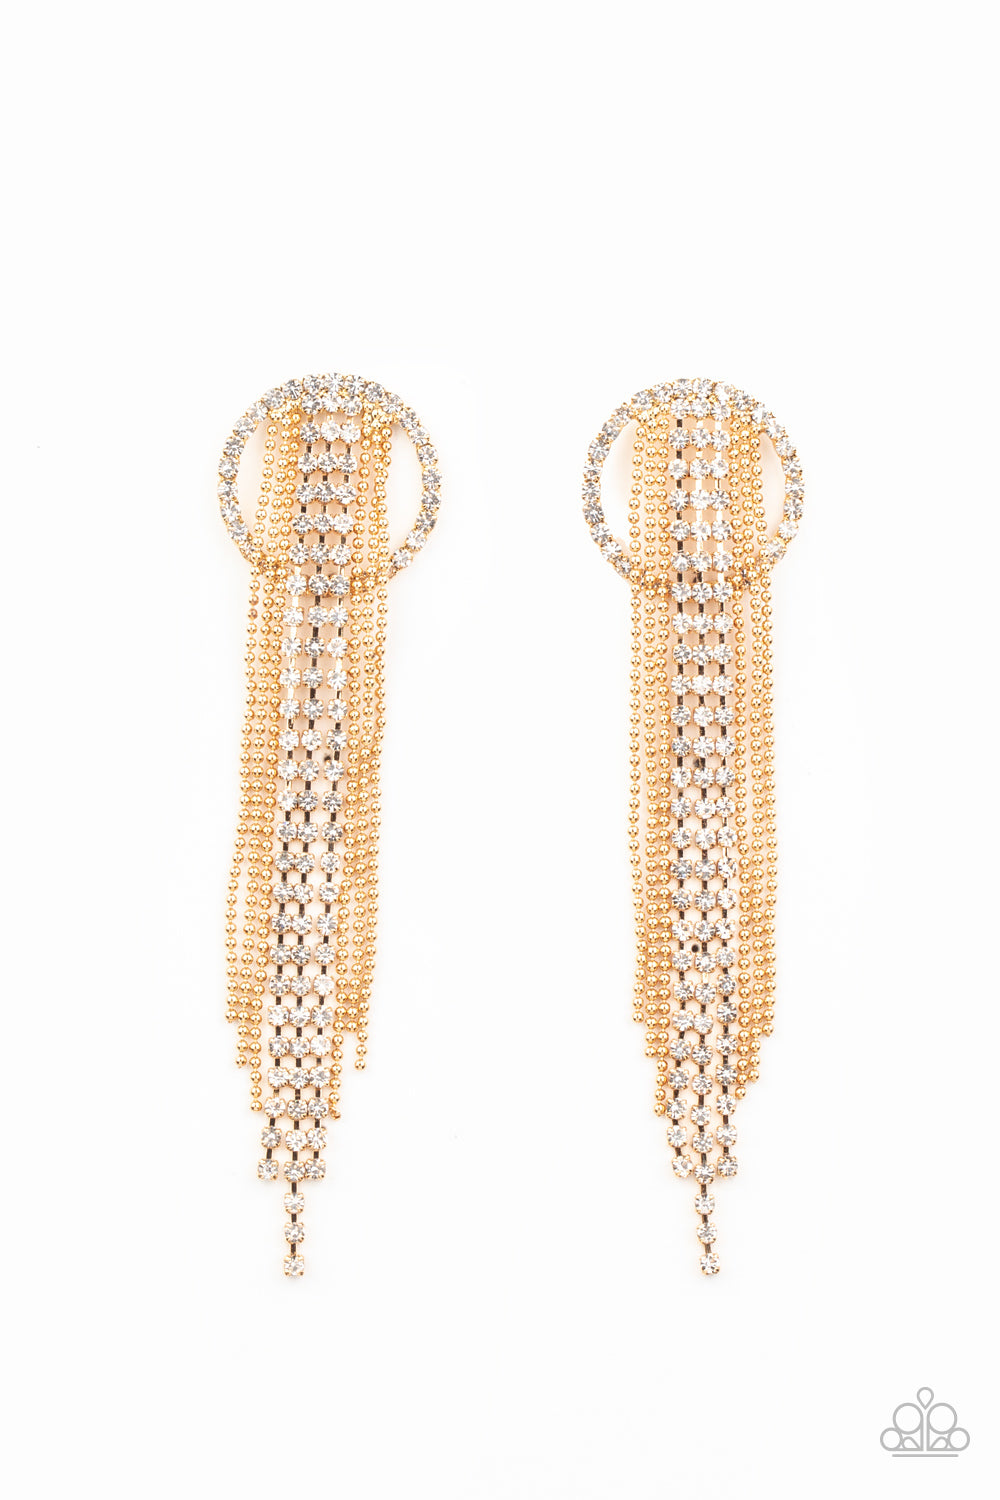 Dazzle by Default Gold Earring - Paparazzi Accessories  Dainty strands of glassy white rhinestones and shimmery gold ball-chain stream from the top of a bedazzled white rhinestone hoop, creating a dazzling fringe. Earring attaches to a standard post fitting.  All Paparazzi Accessories are lead free and nickel free!   Sold as one pair of post earrings.